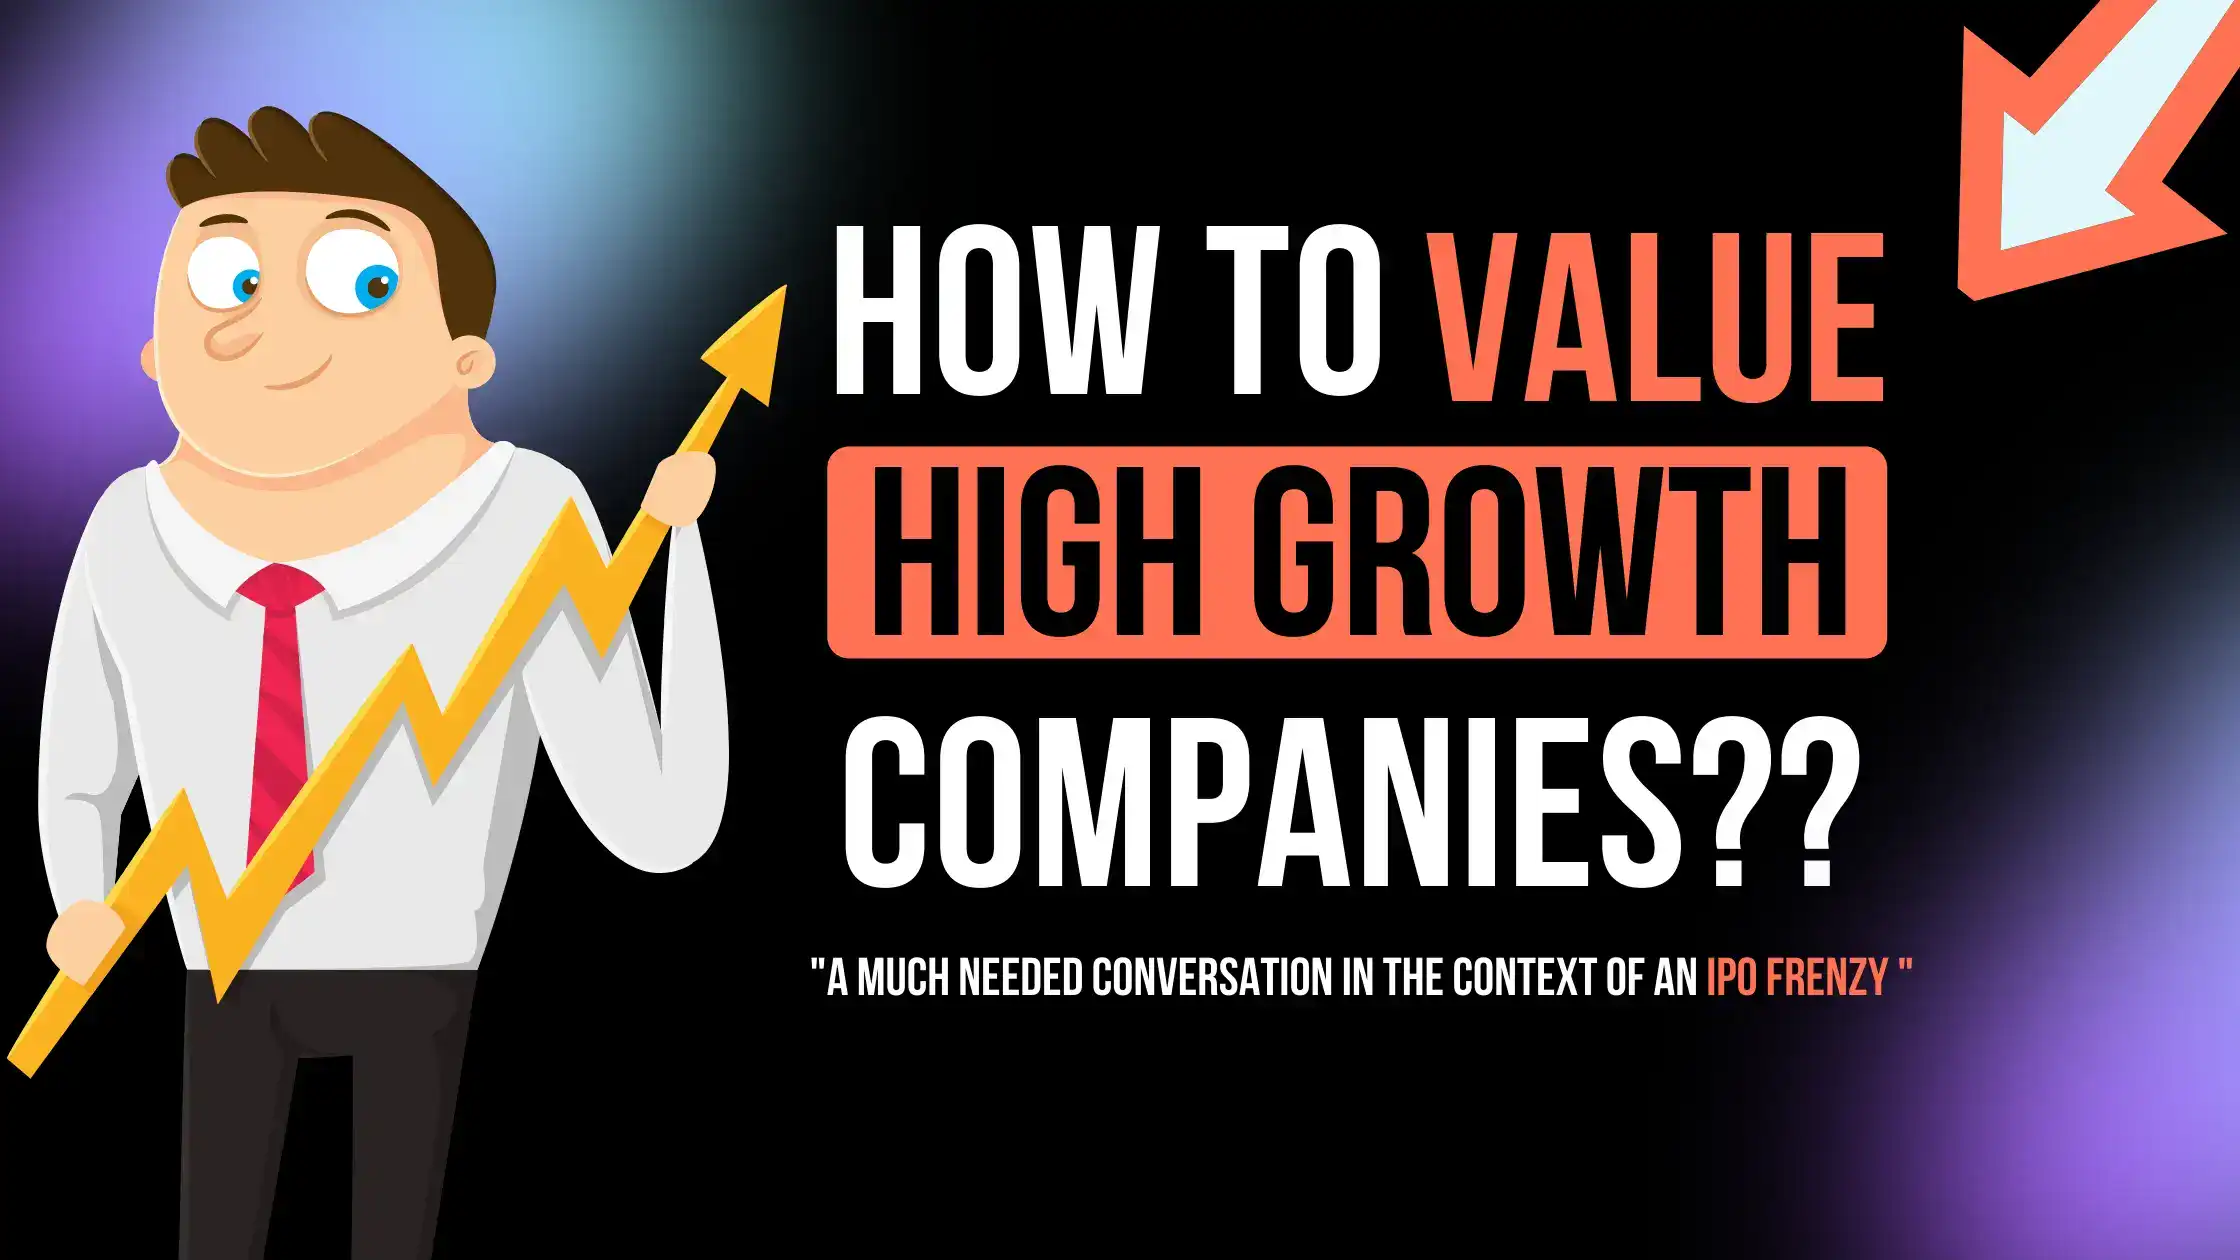 How to value high growth companies?